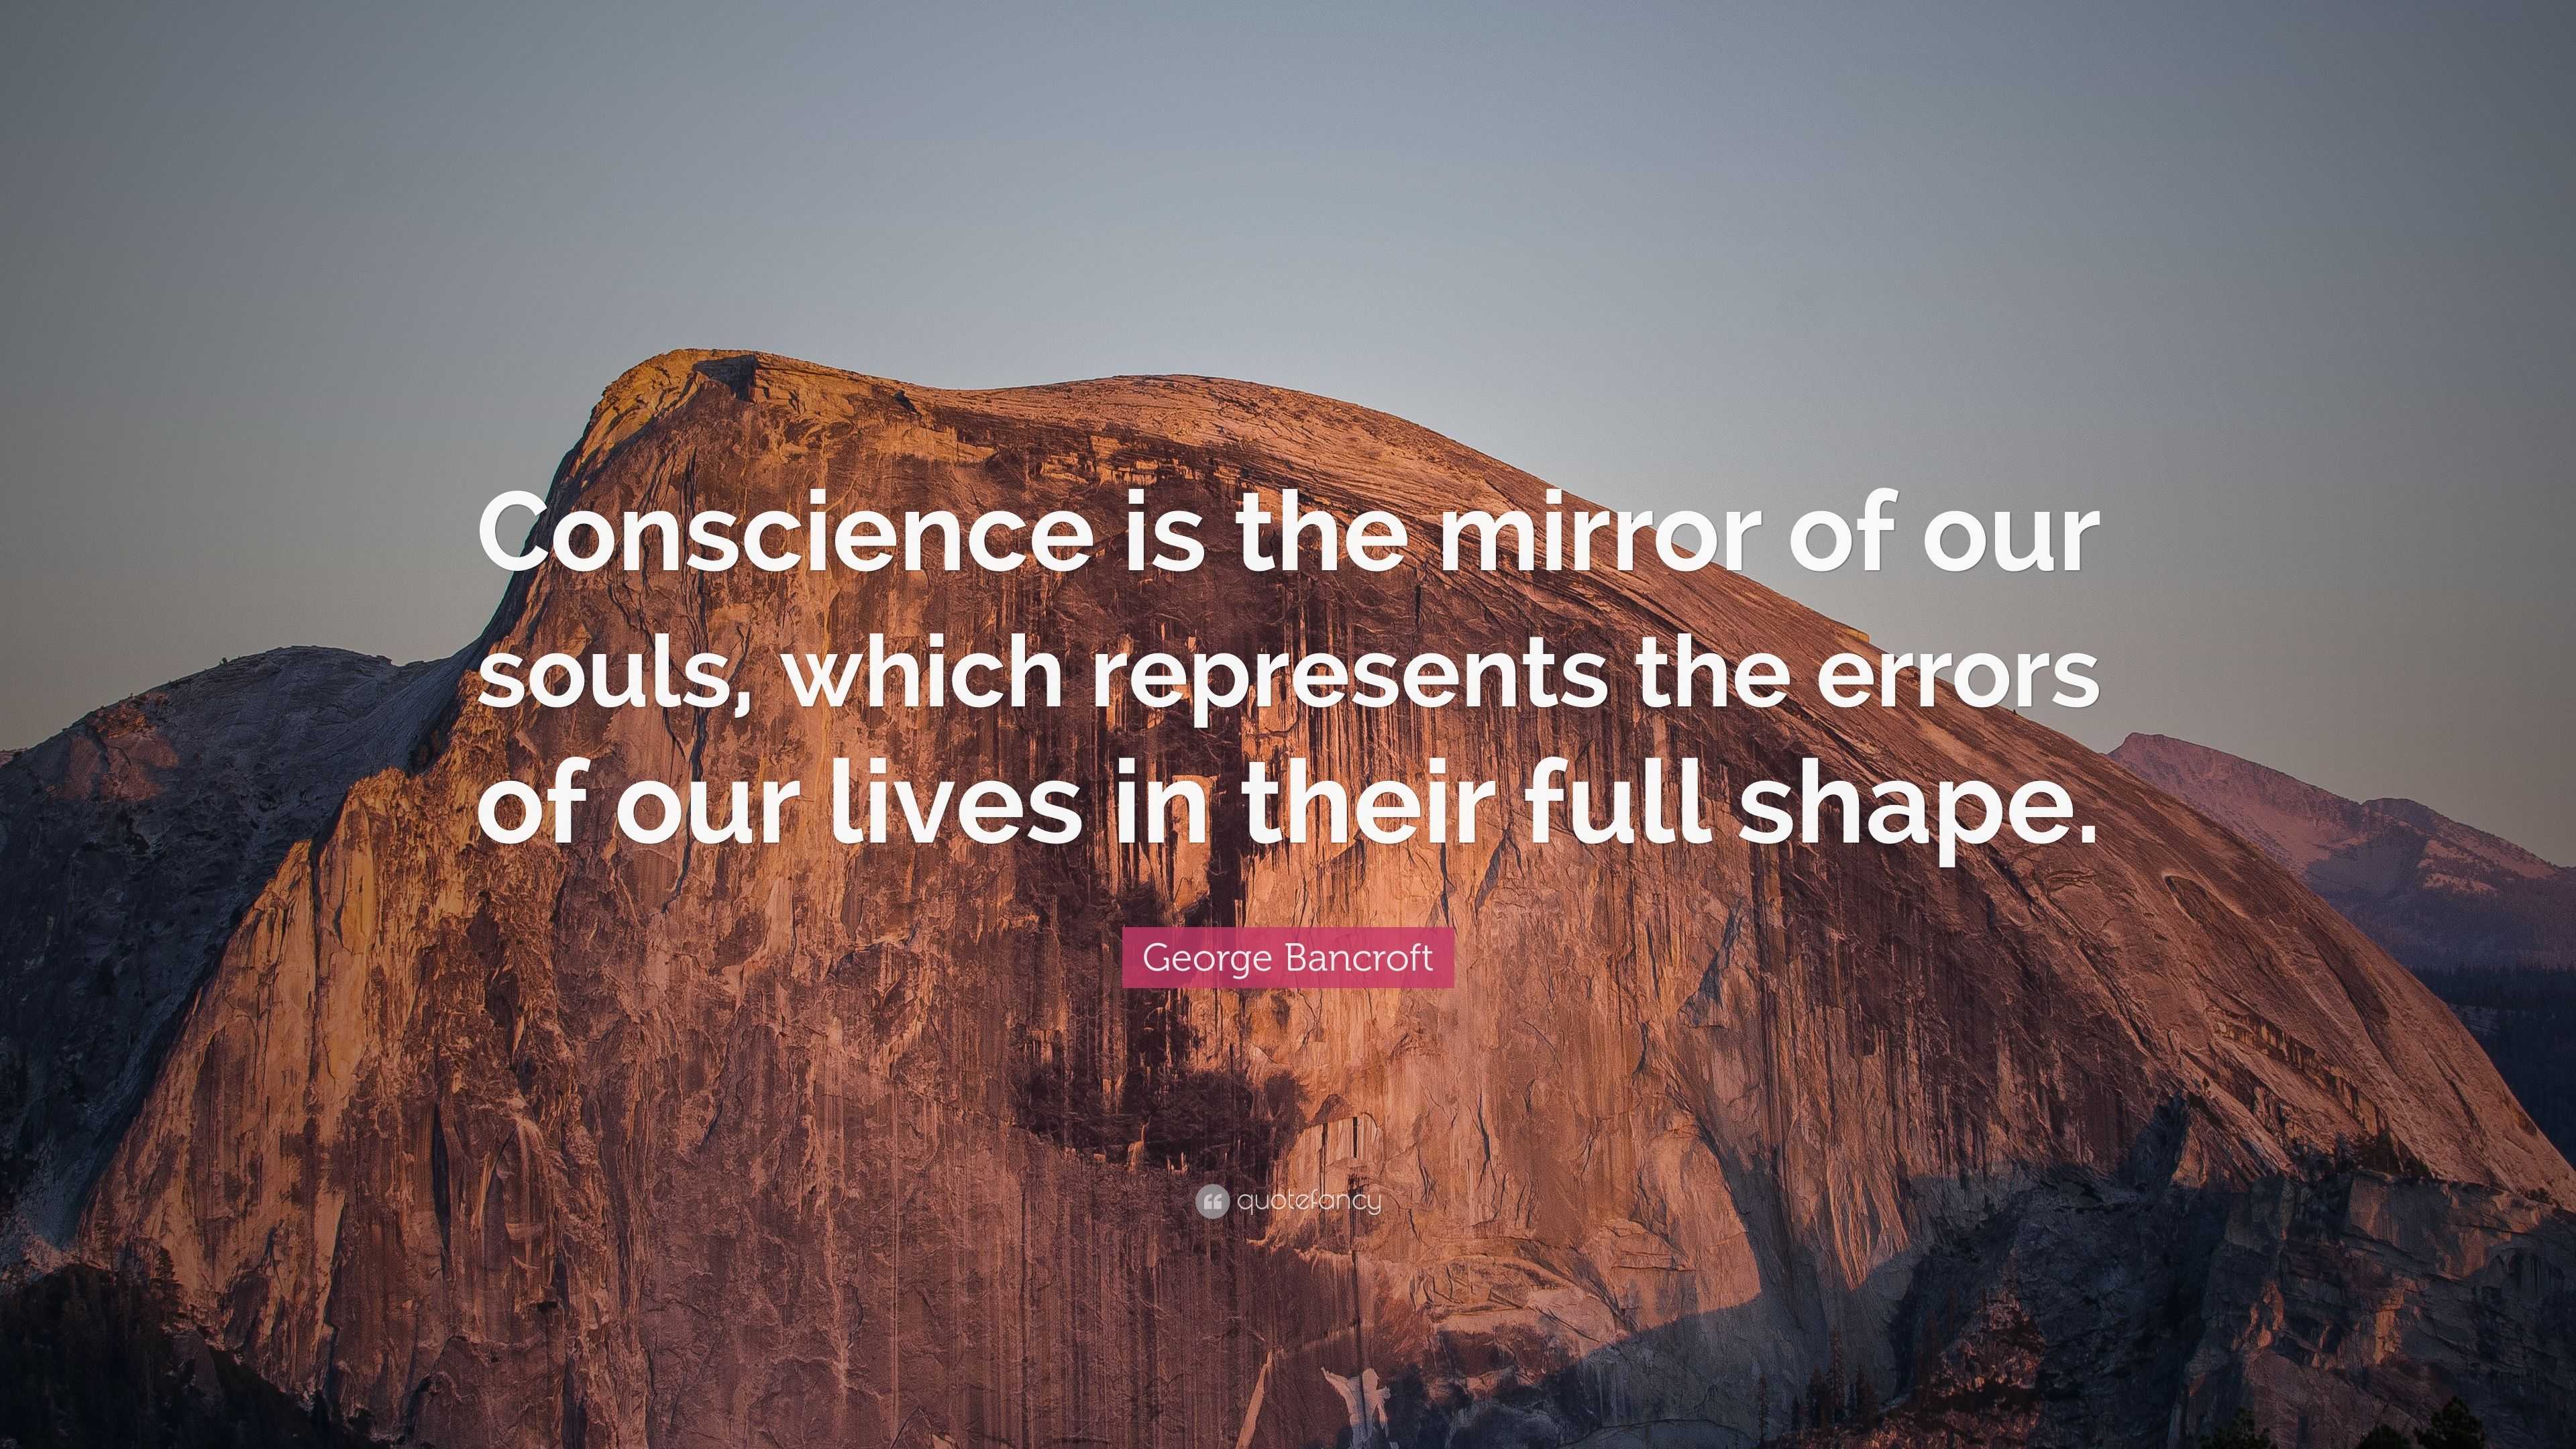 George Bancroft Quote: “Conscience is the mirror of our souls, which ...